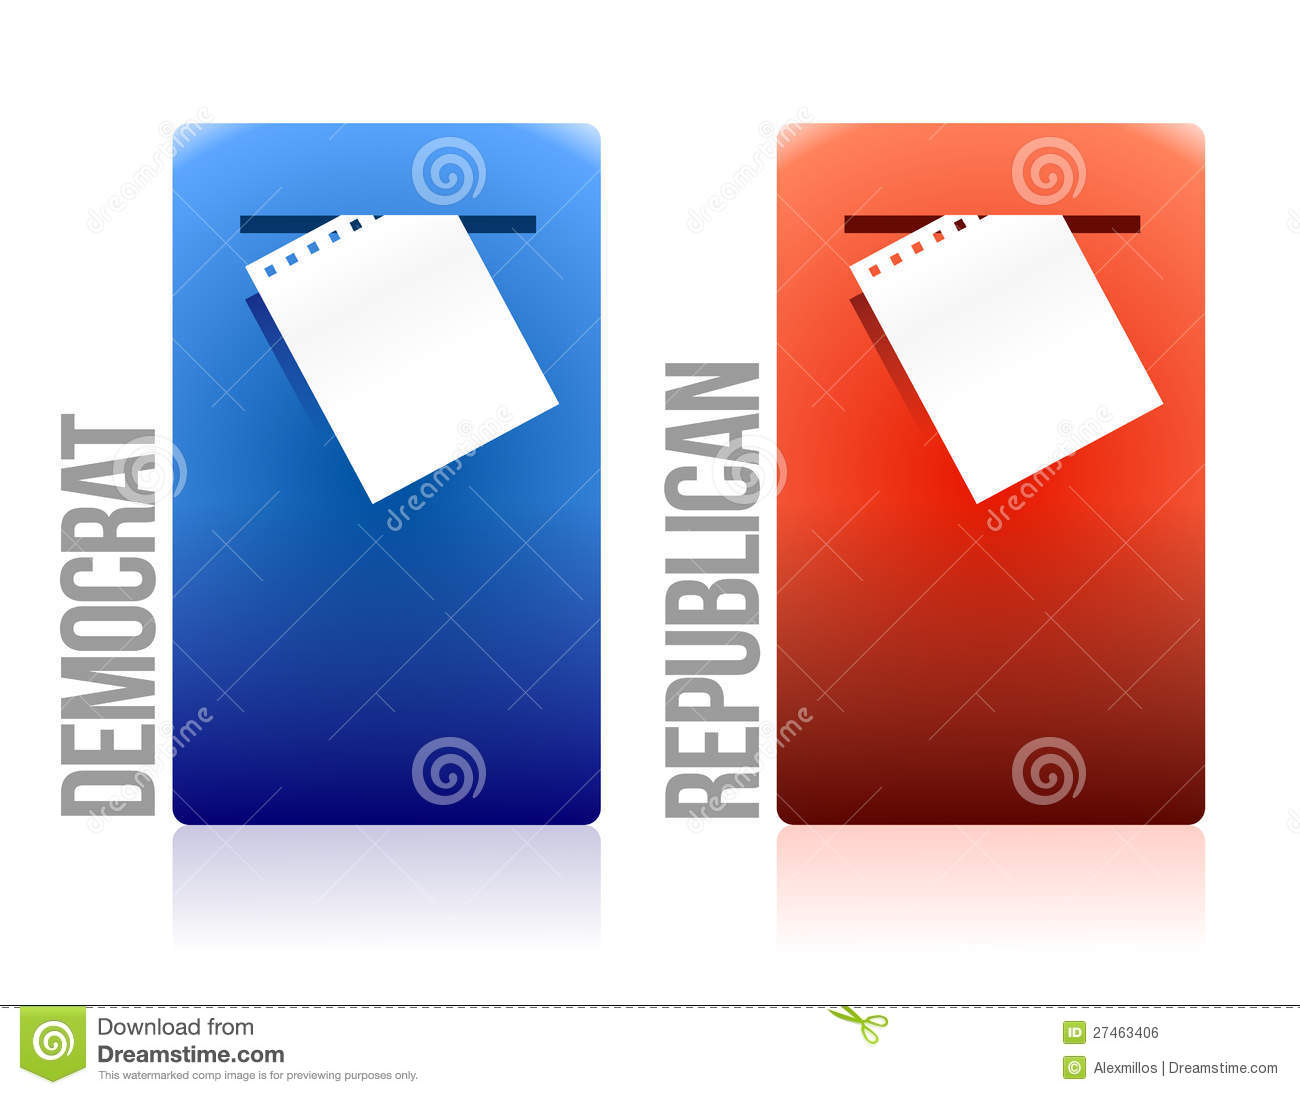 Voting Ballot Democrat And Republican Royalty Free Stock Image   Image